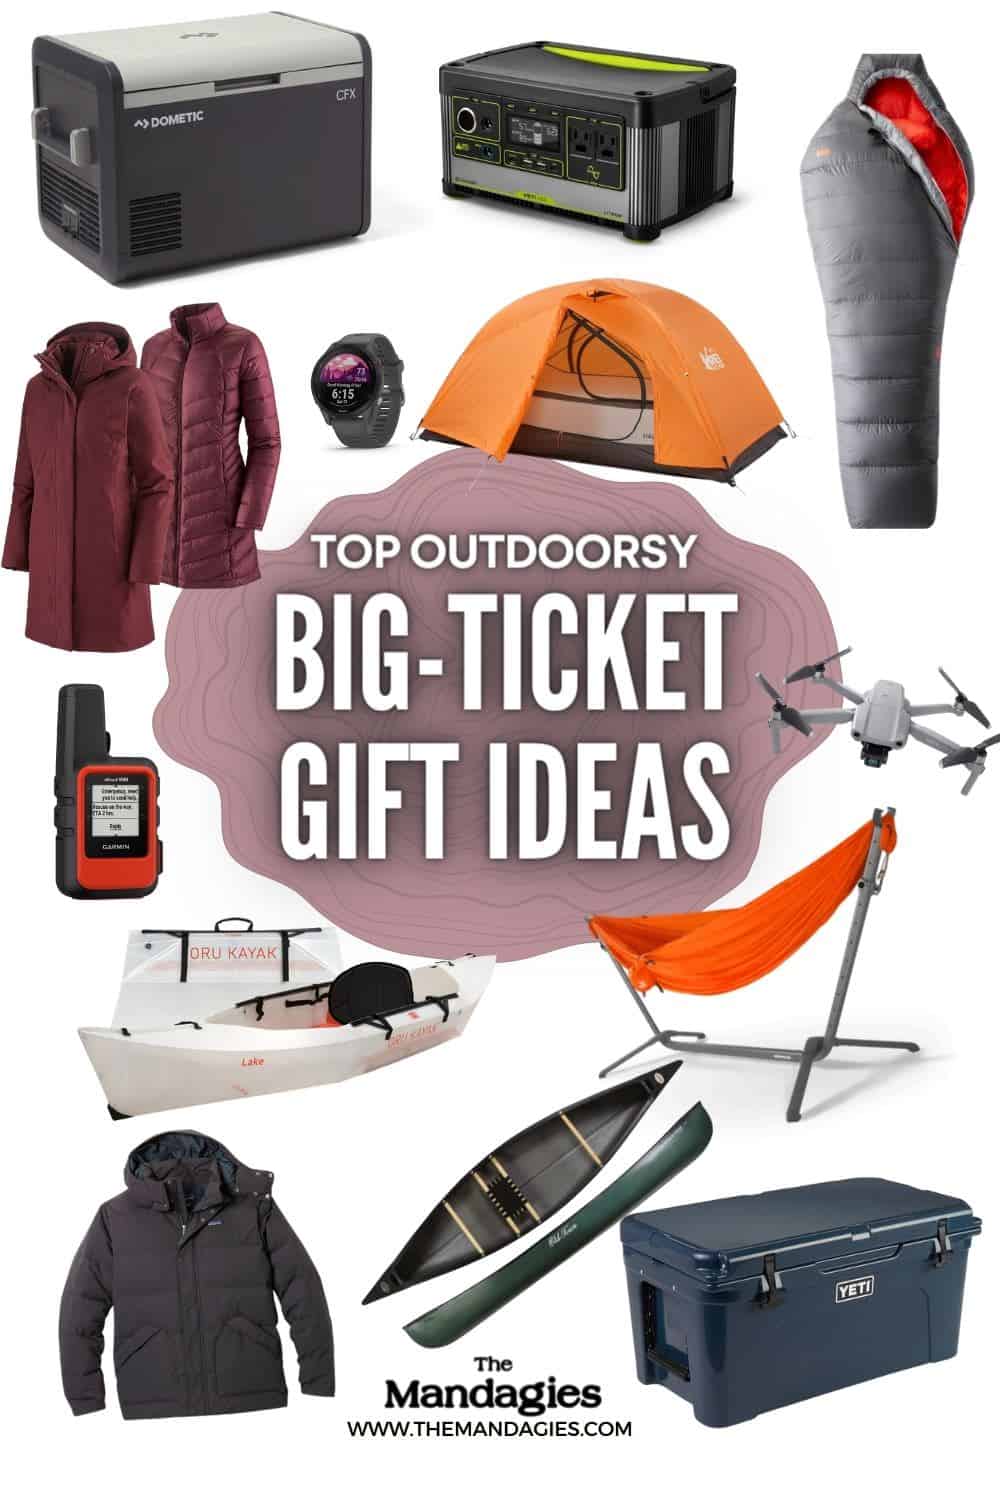 Big Ticket Gift Ideas for the Outdoors - Pin1